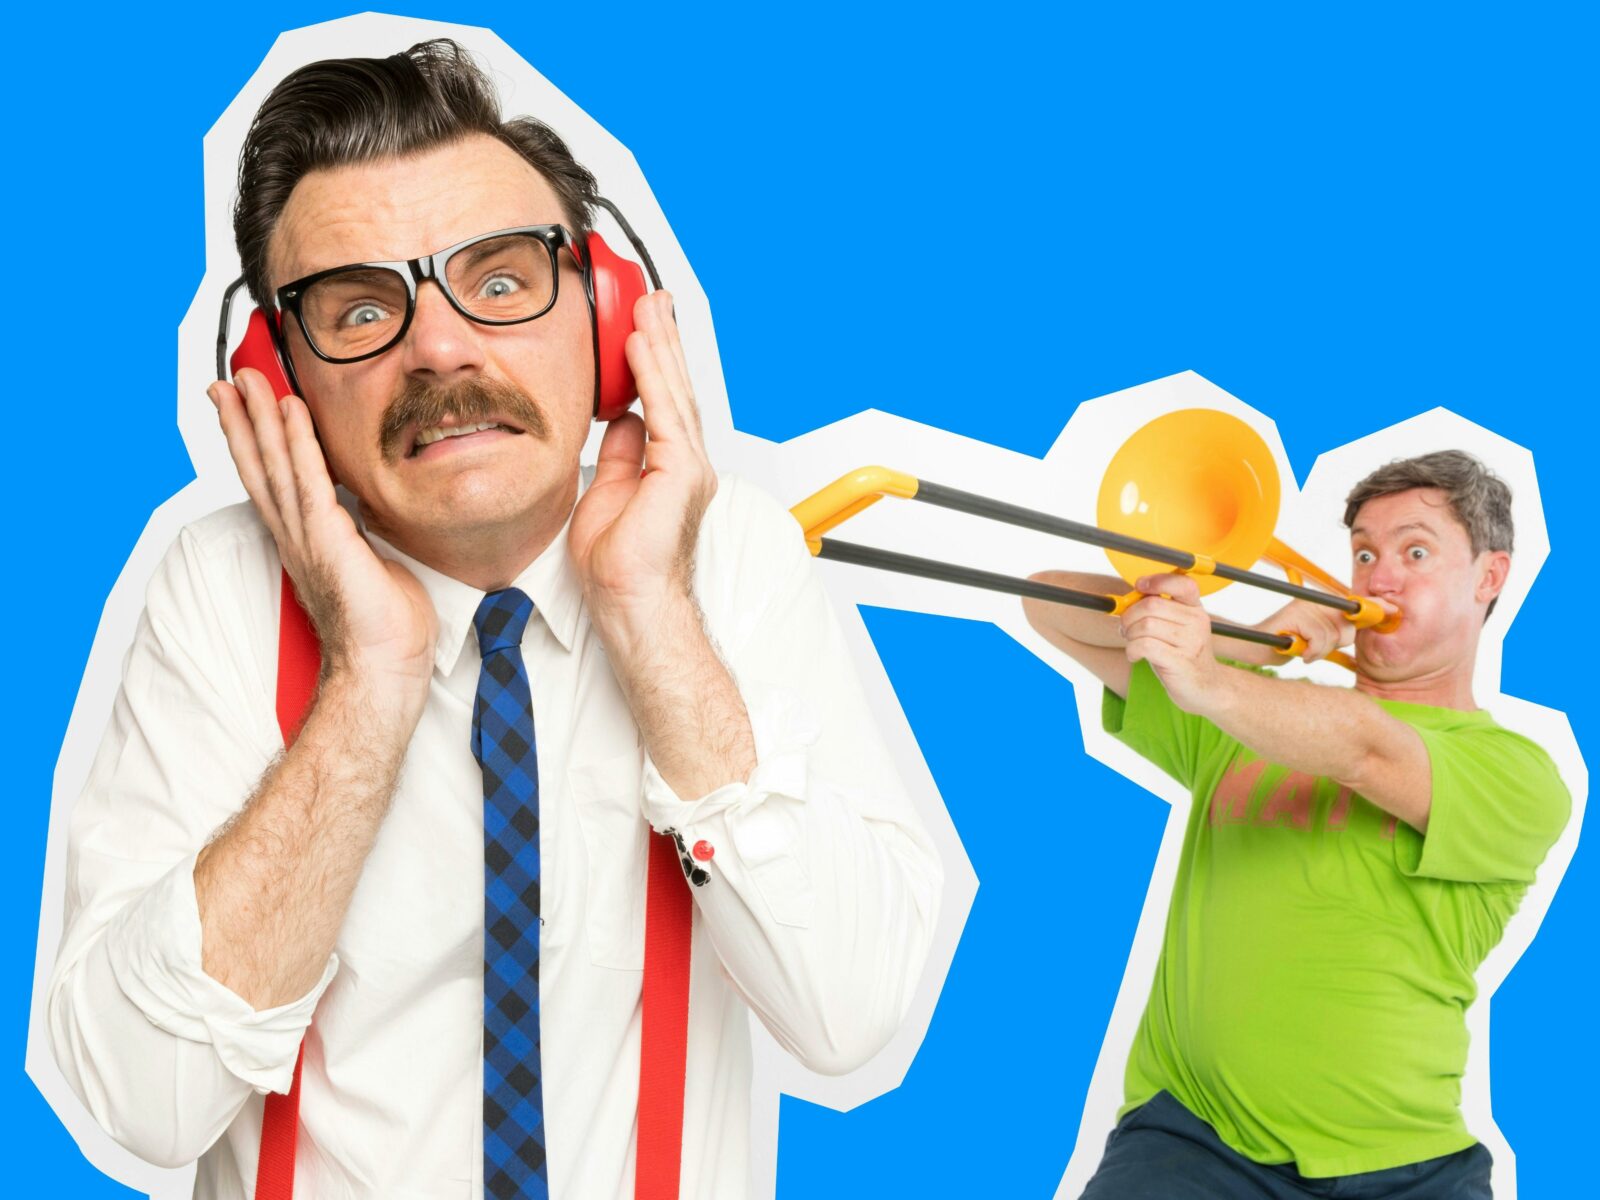 Person playing a trombone to a person in the foreground, who is wearing noise-isolating headphones.